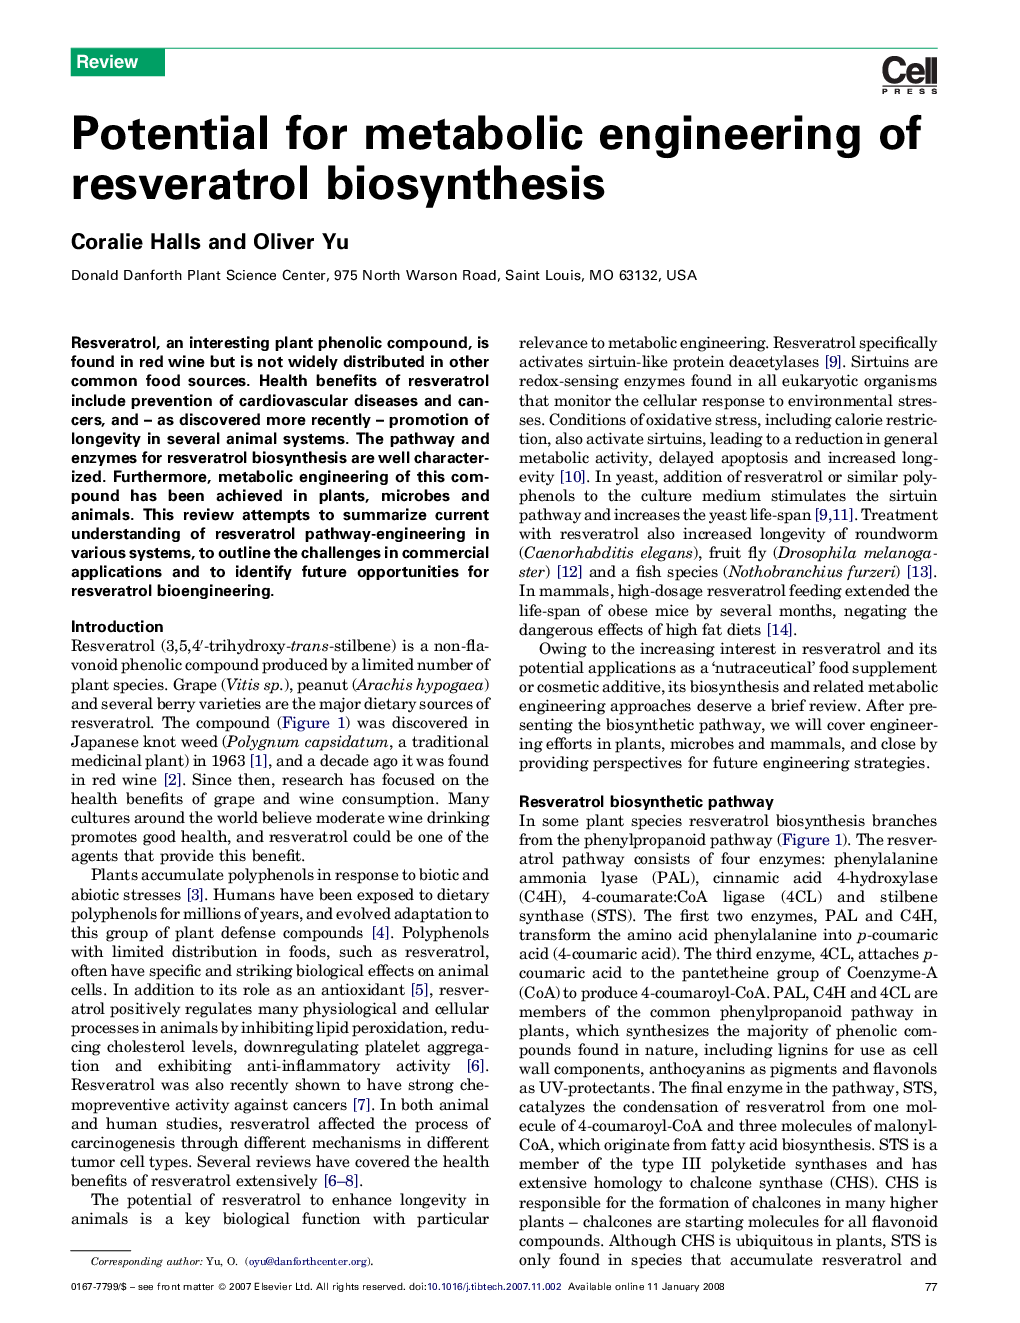 Potential for metabolic engineering of resveratrol biosynthesis